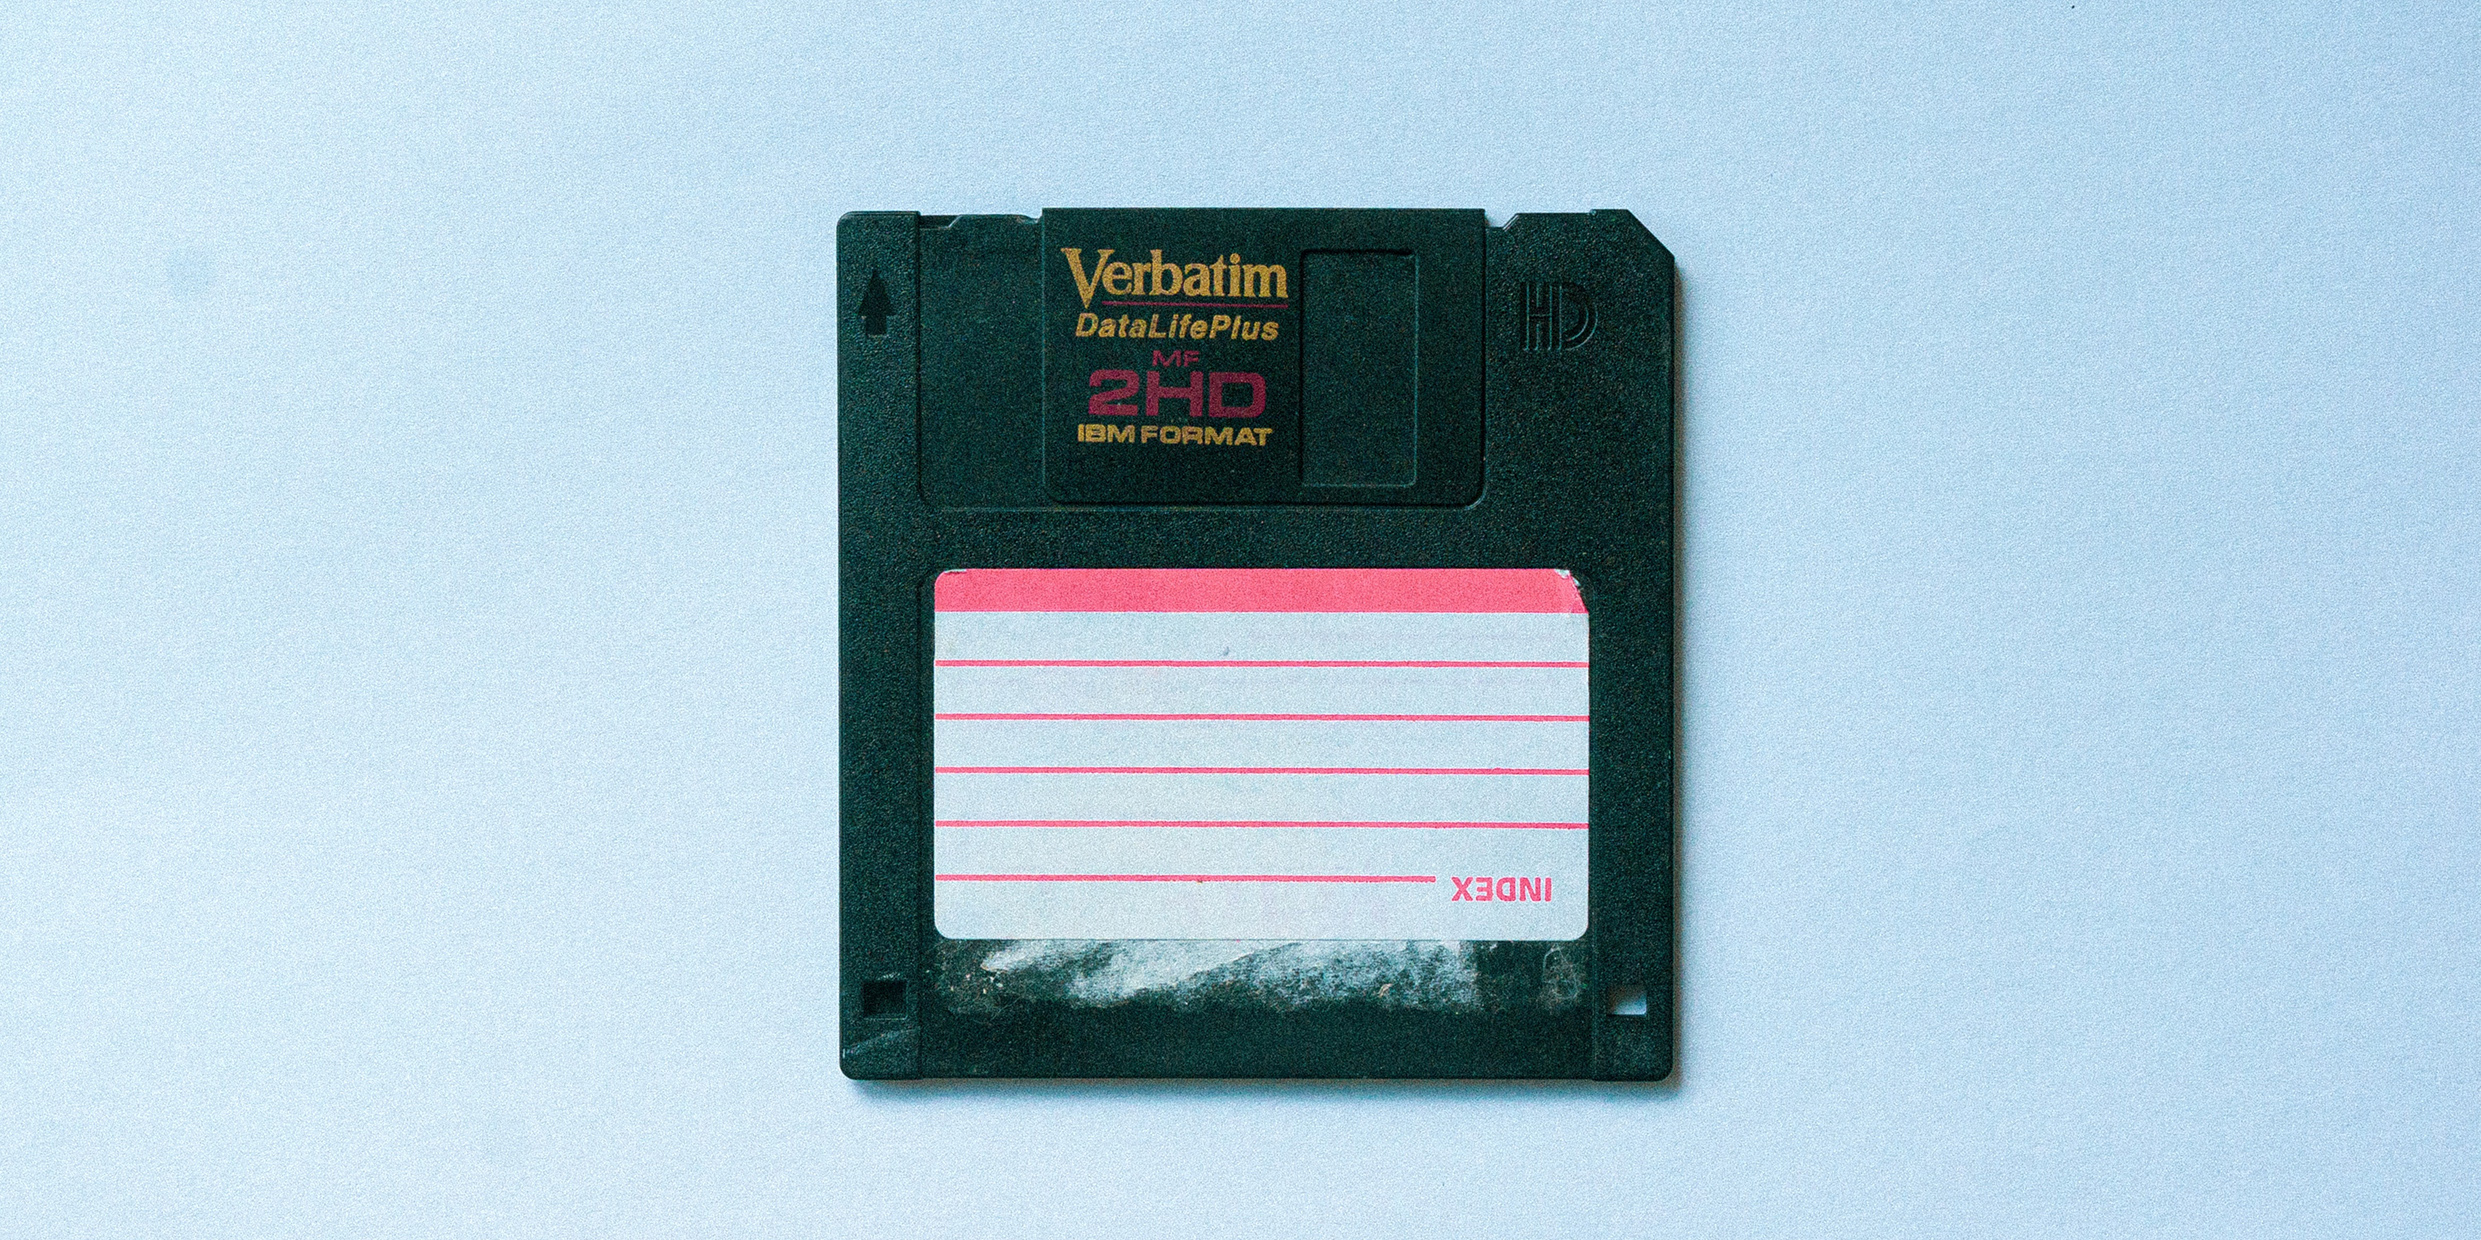 Image of an old floppy disk